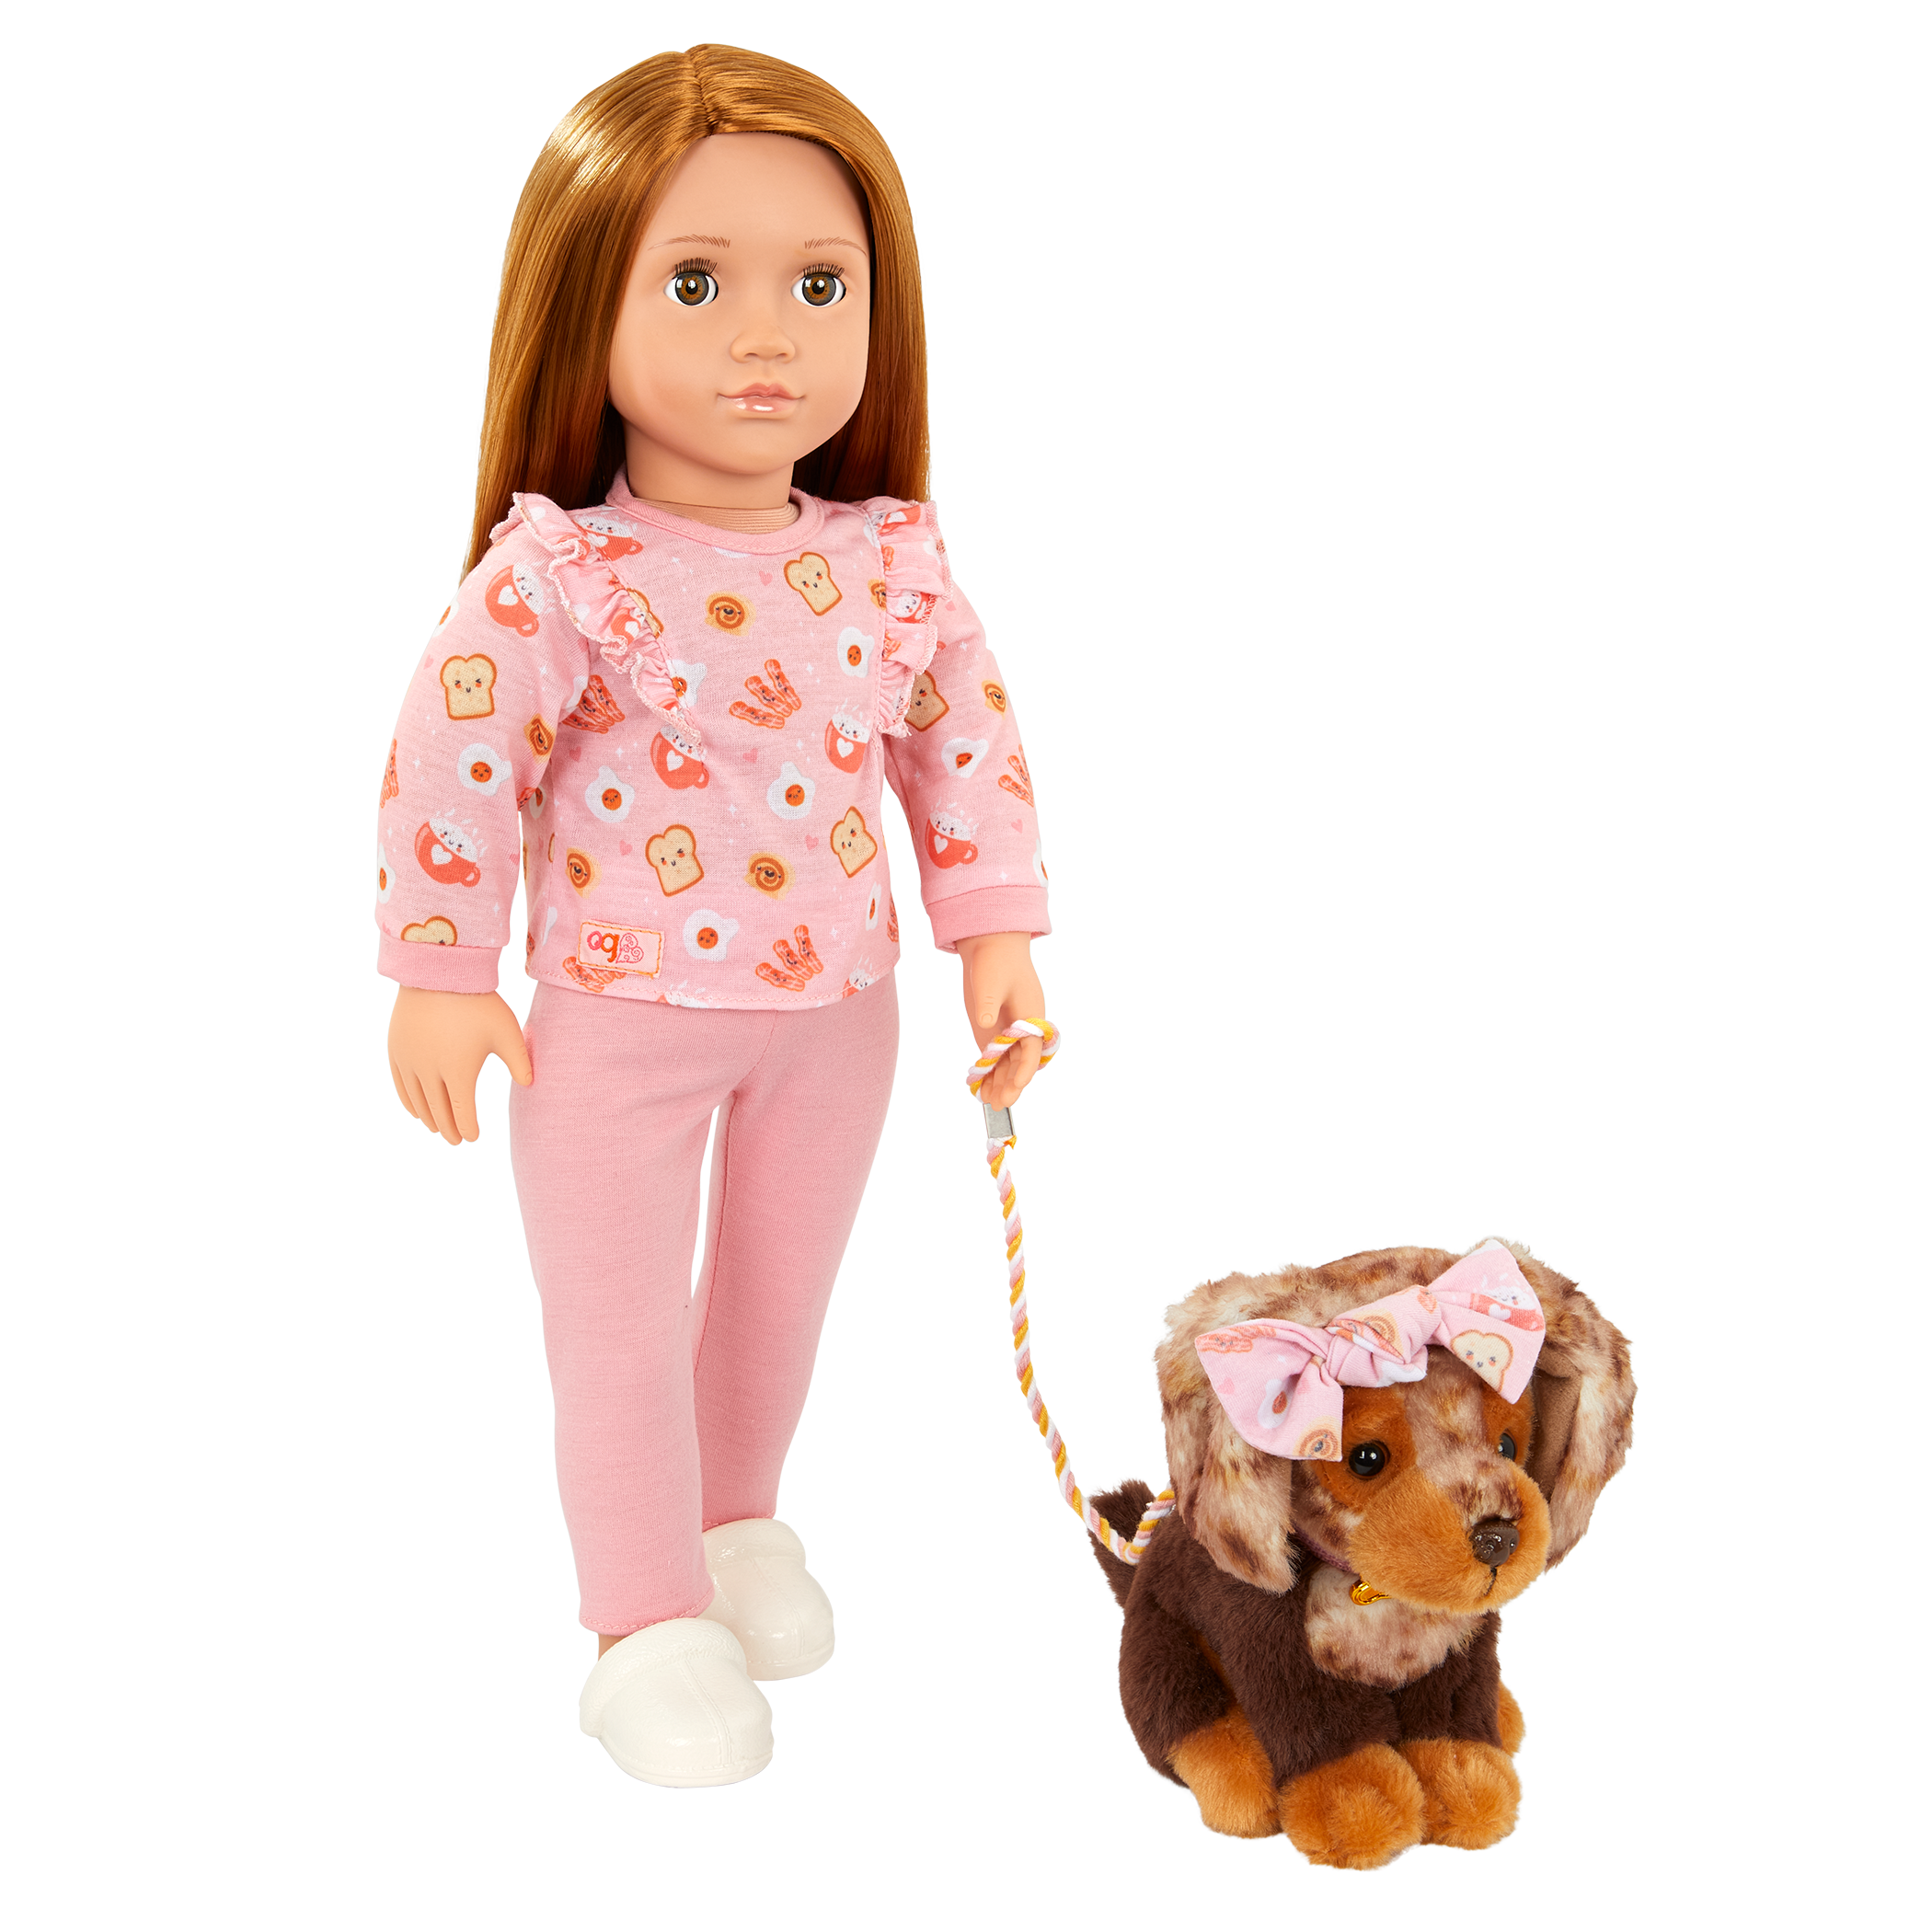 Our Generation 18-inch Doll & Pet Claudia & Cinnamon